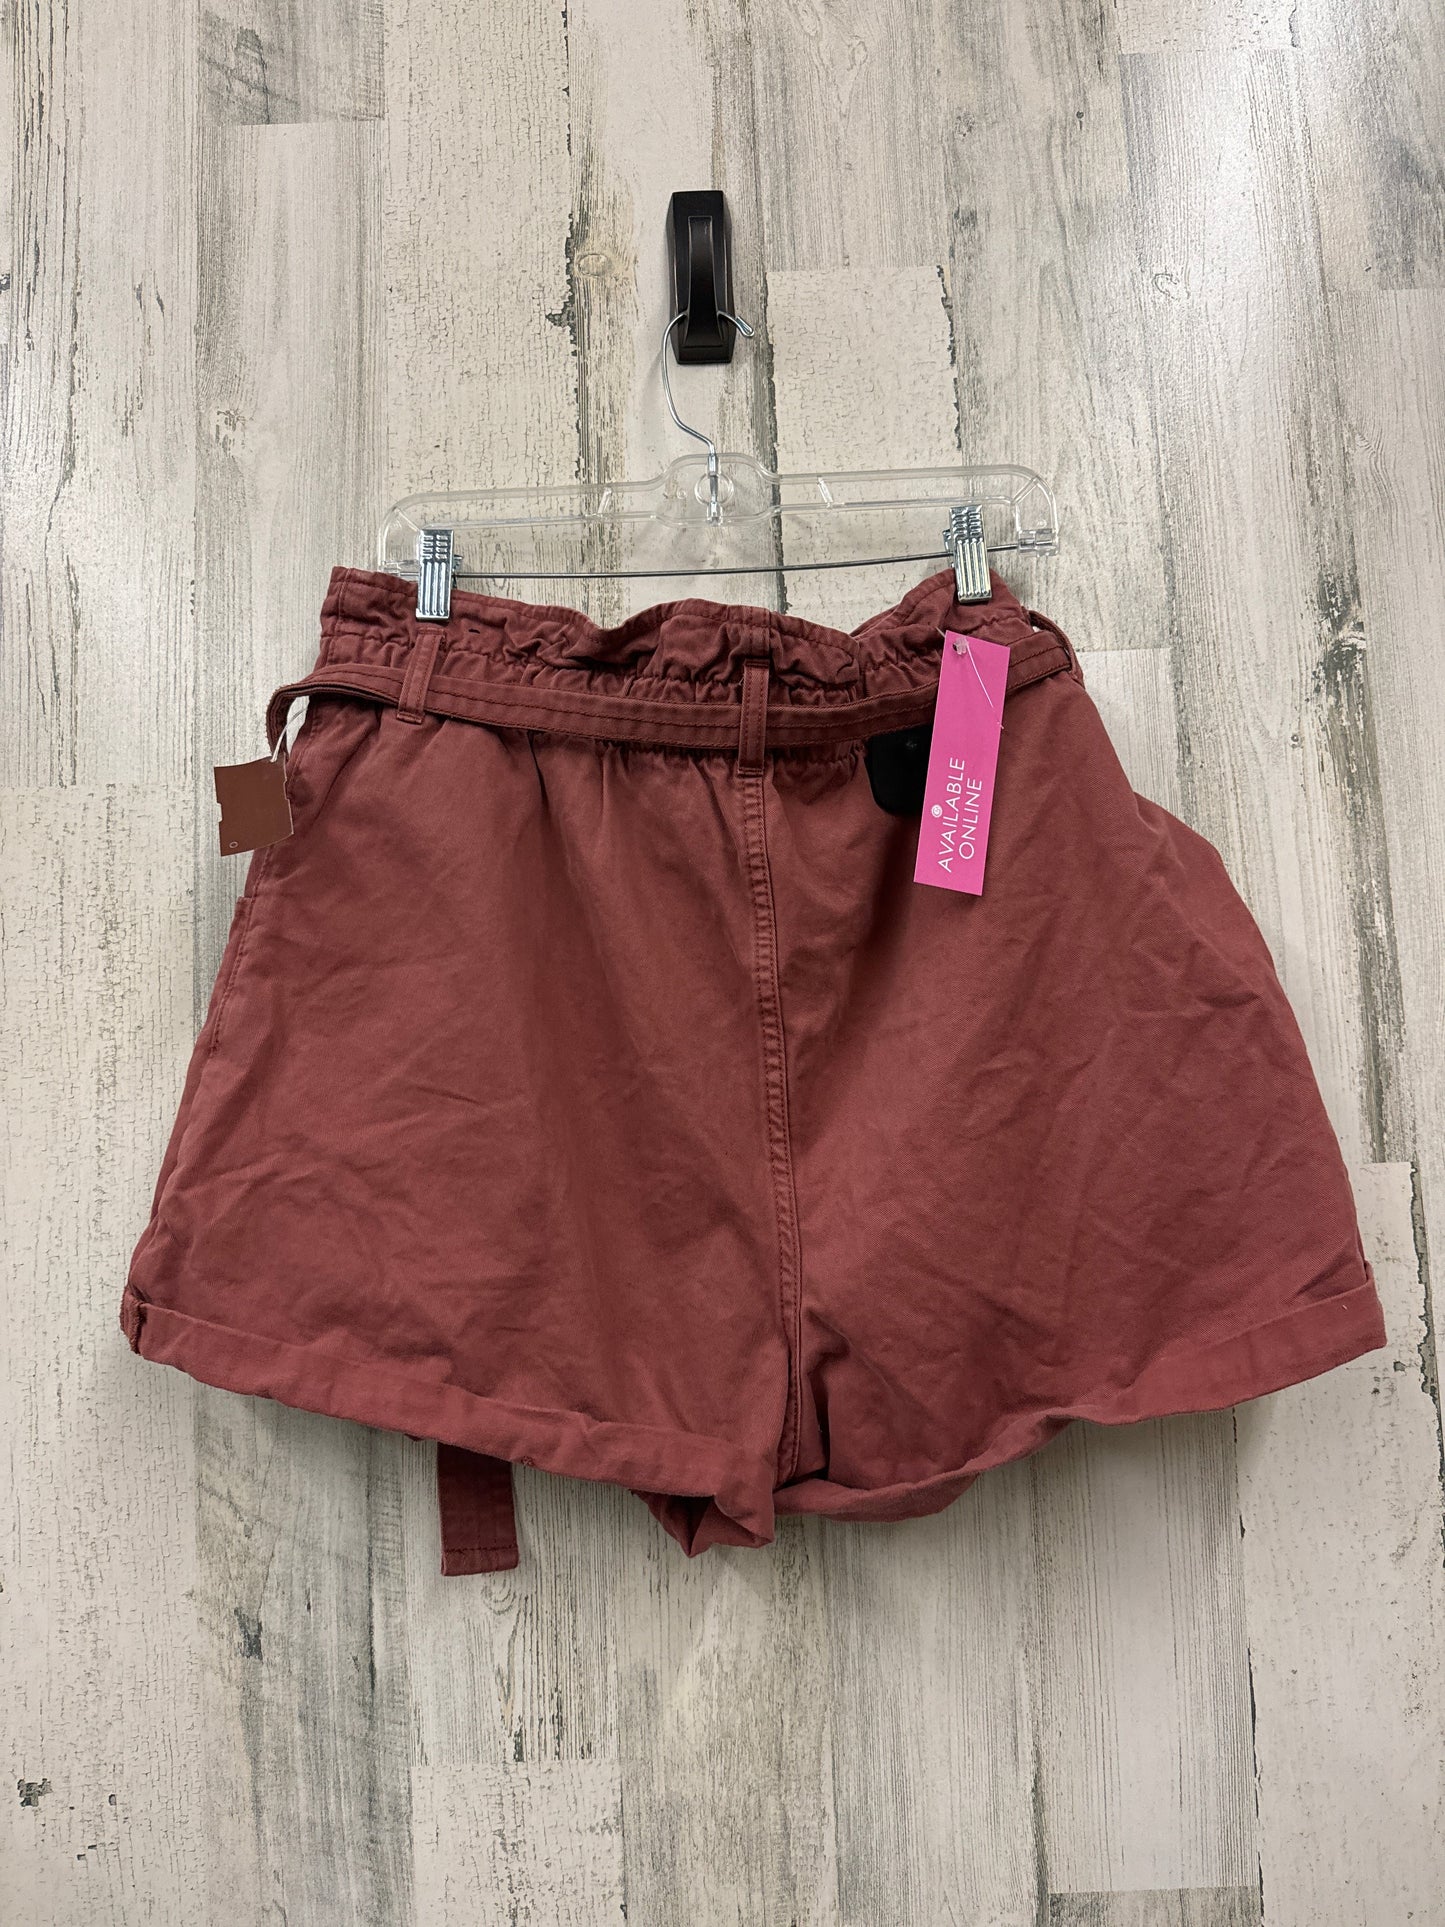 Red Shorts Abercrombie And Fitch, Size Xl